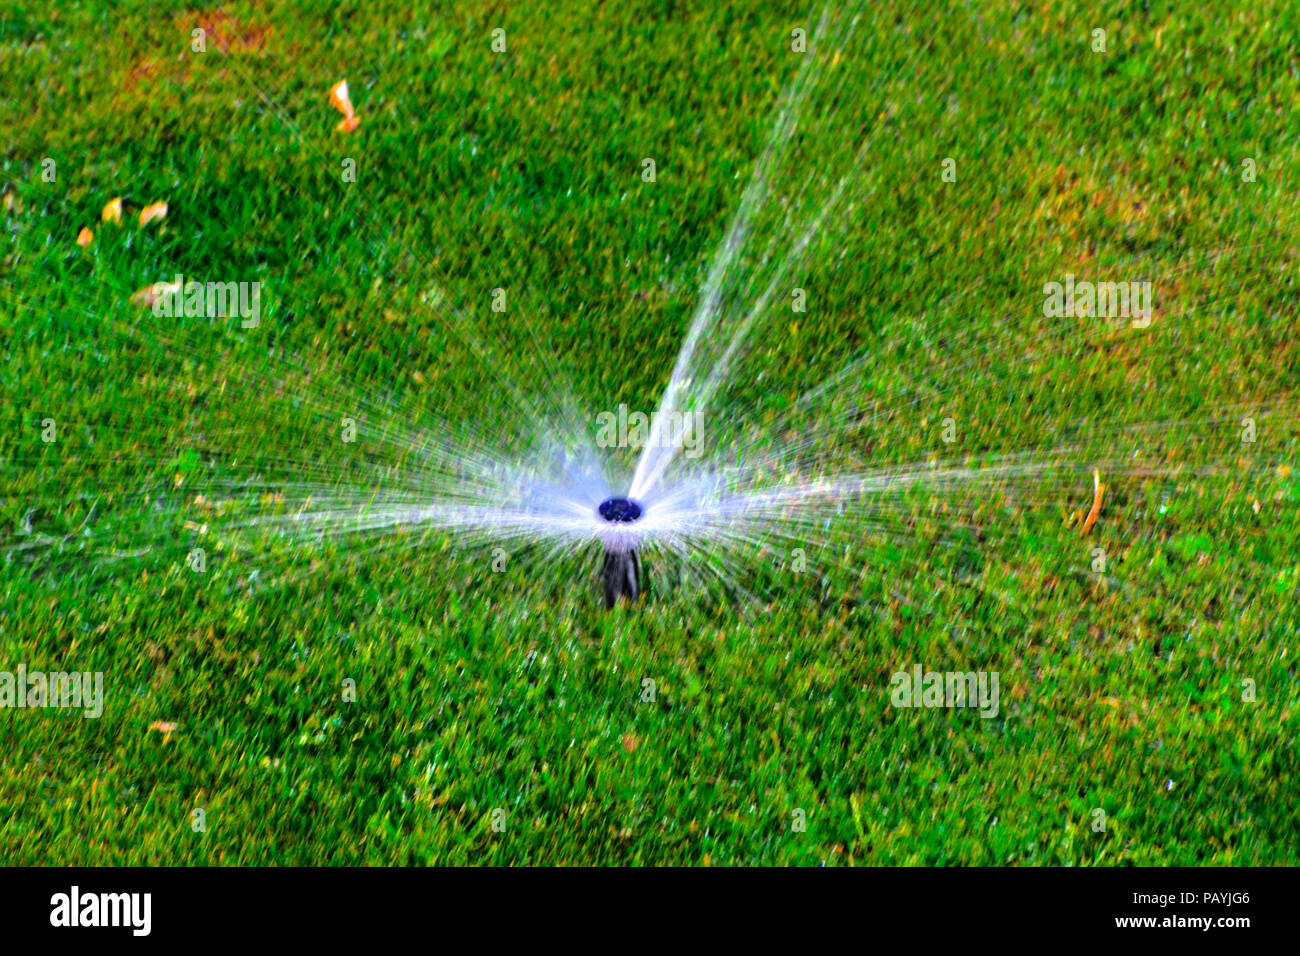 The Modern Device Of The Irrigation Garden Automatic Sprinkler